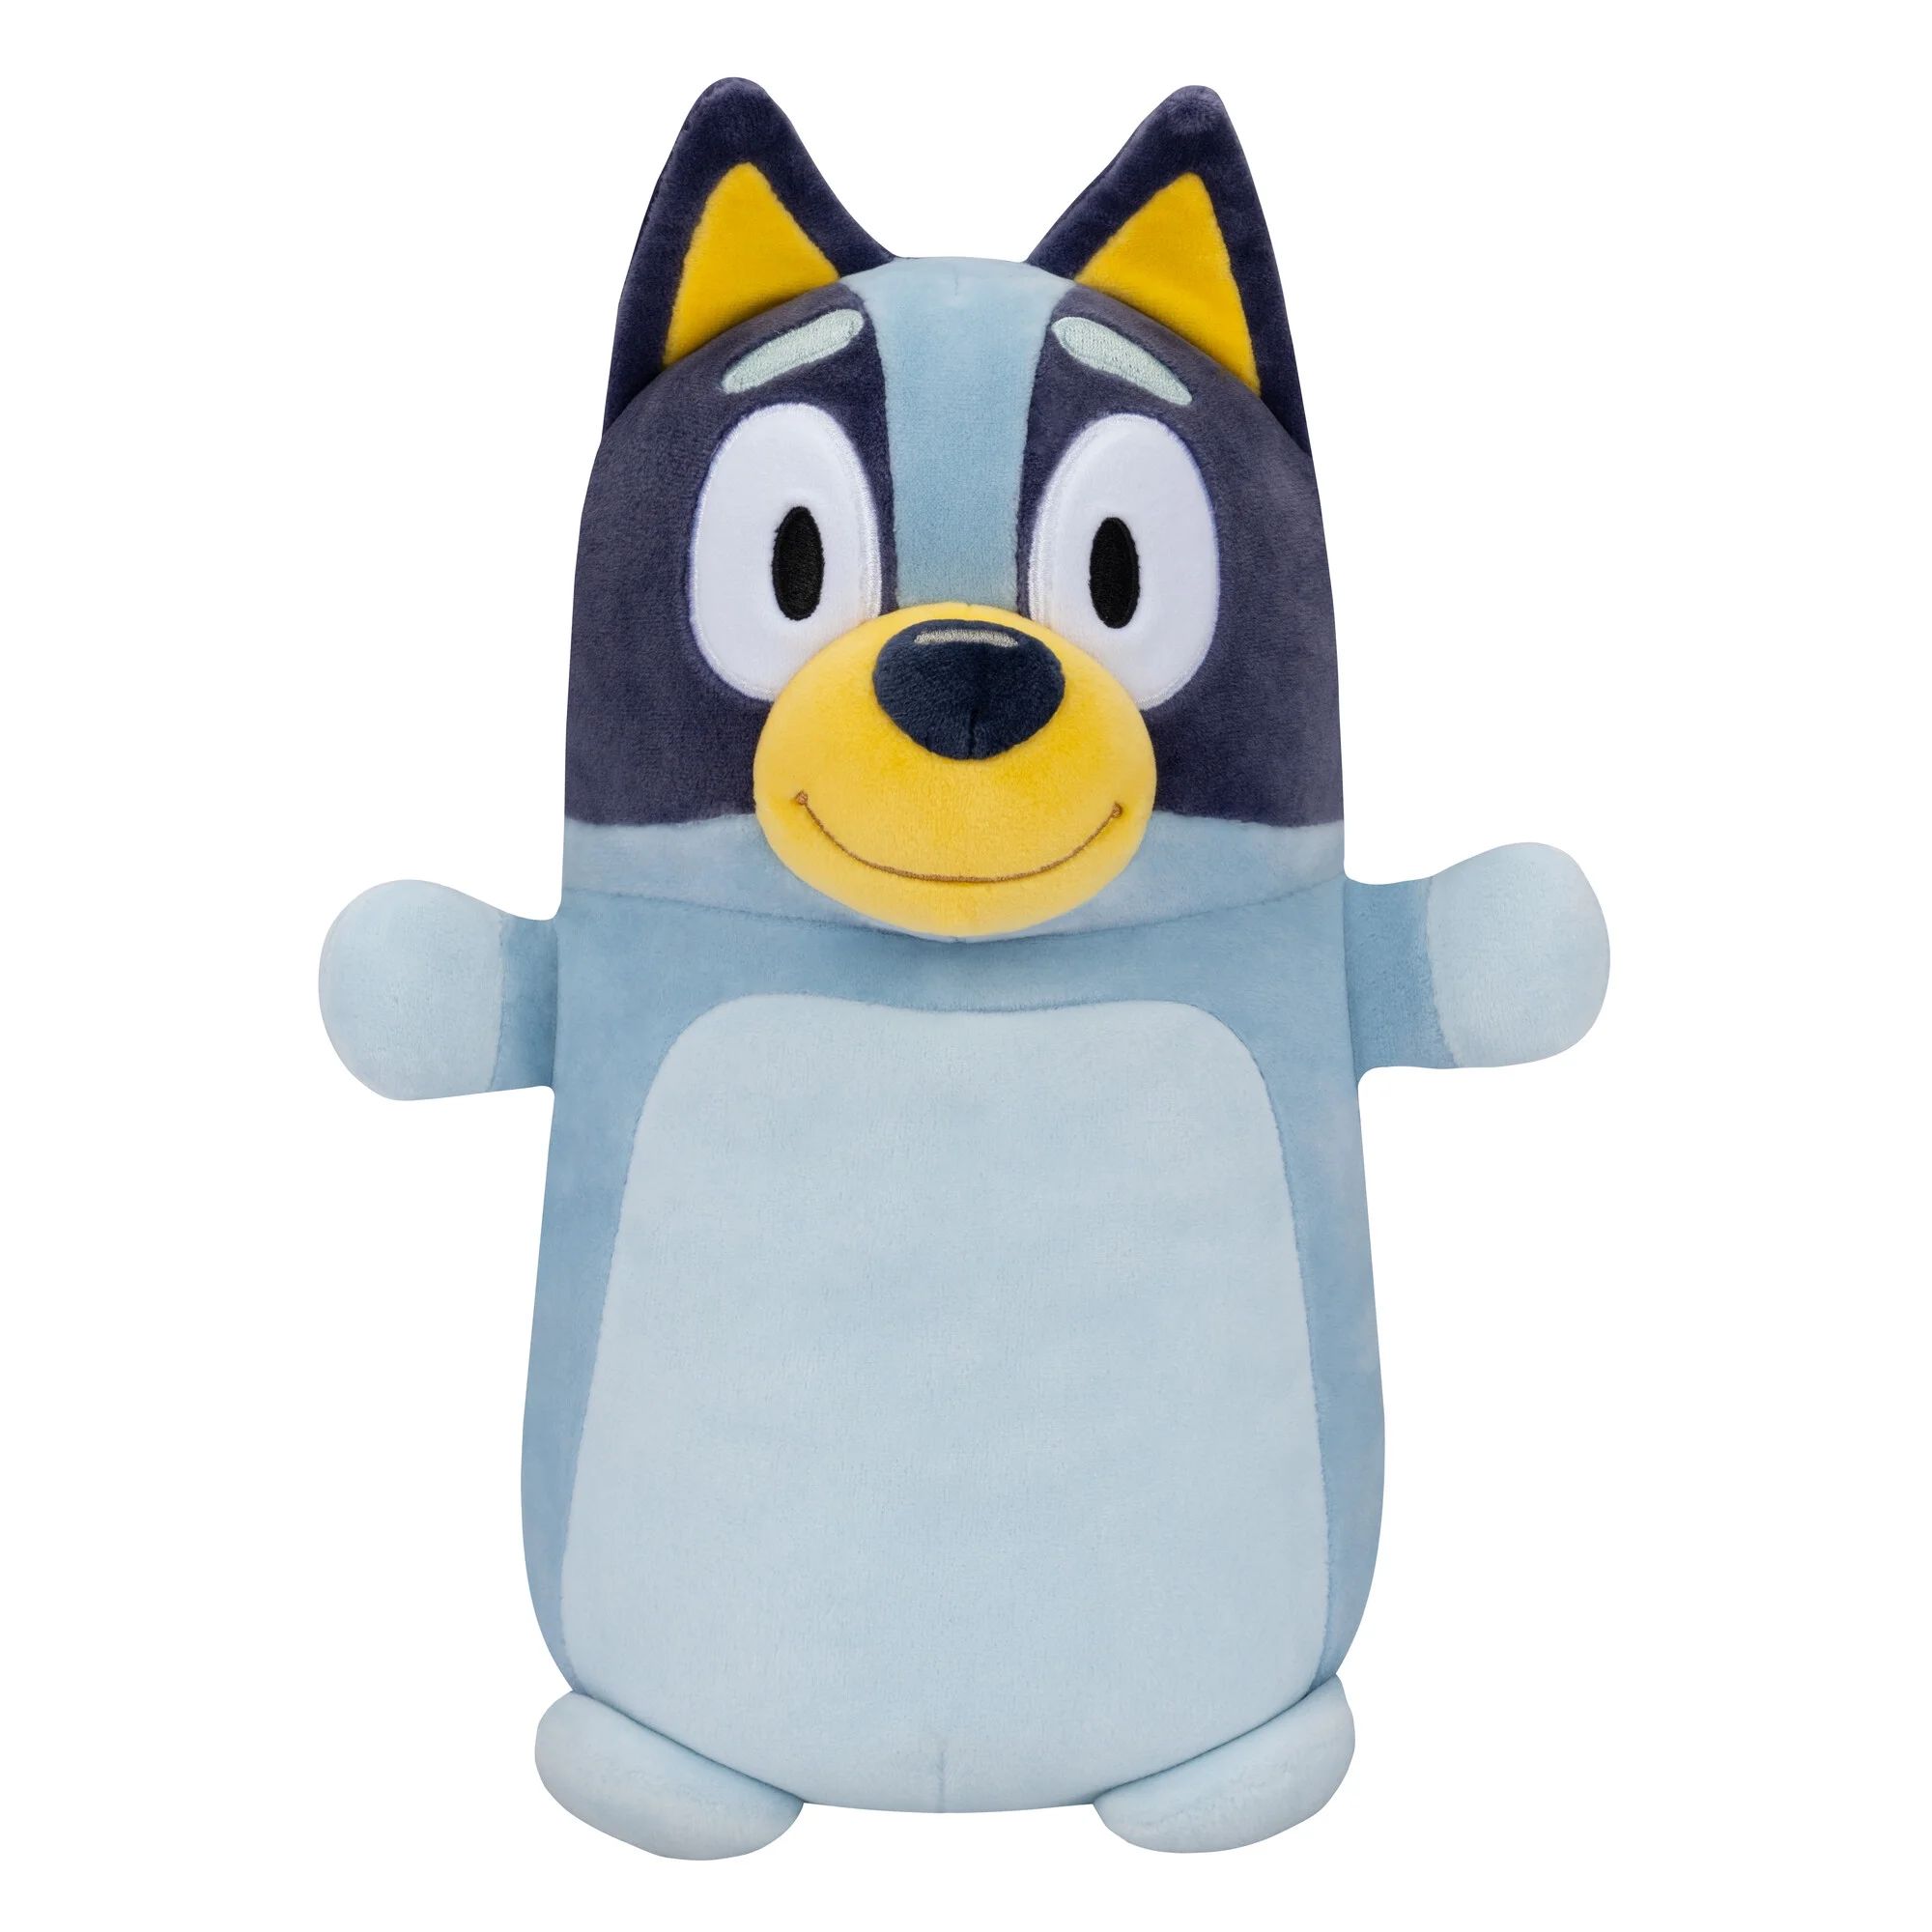 Squishmallows Original 10 inch Bluey HugMees - Childs Ultra Soft Official Jazwares Plush | Walmart (US)